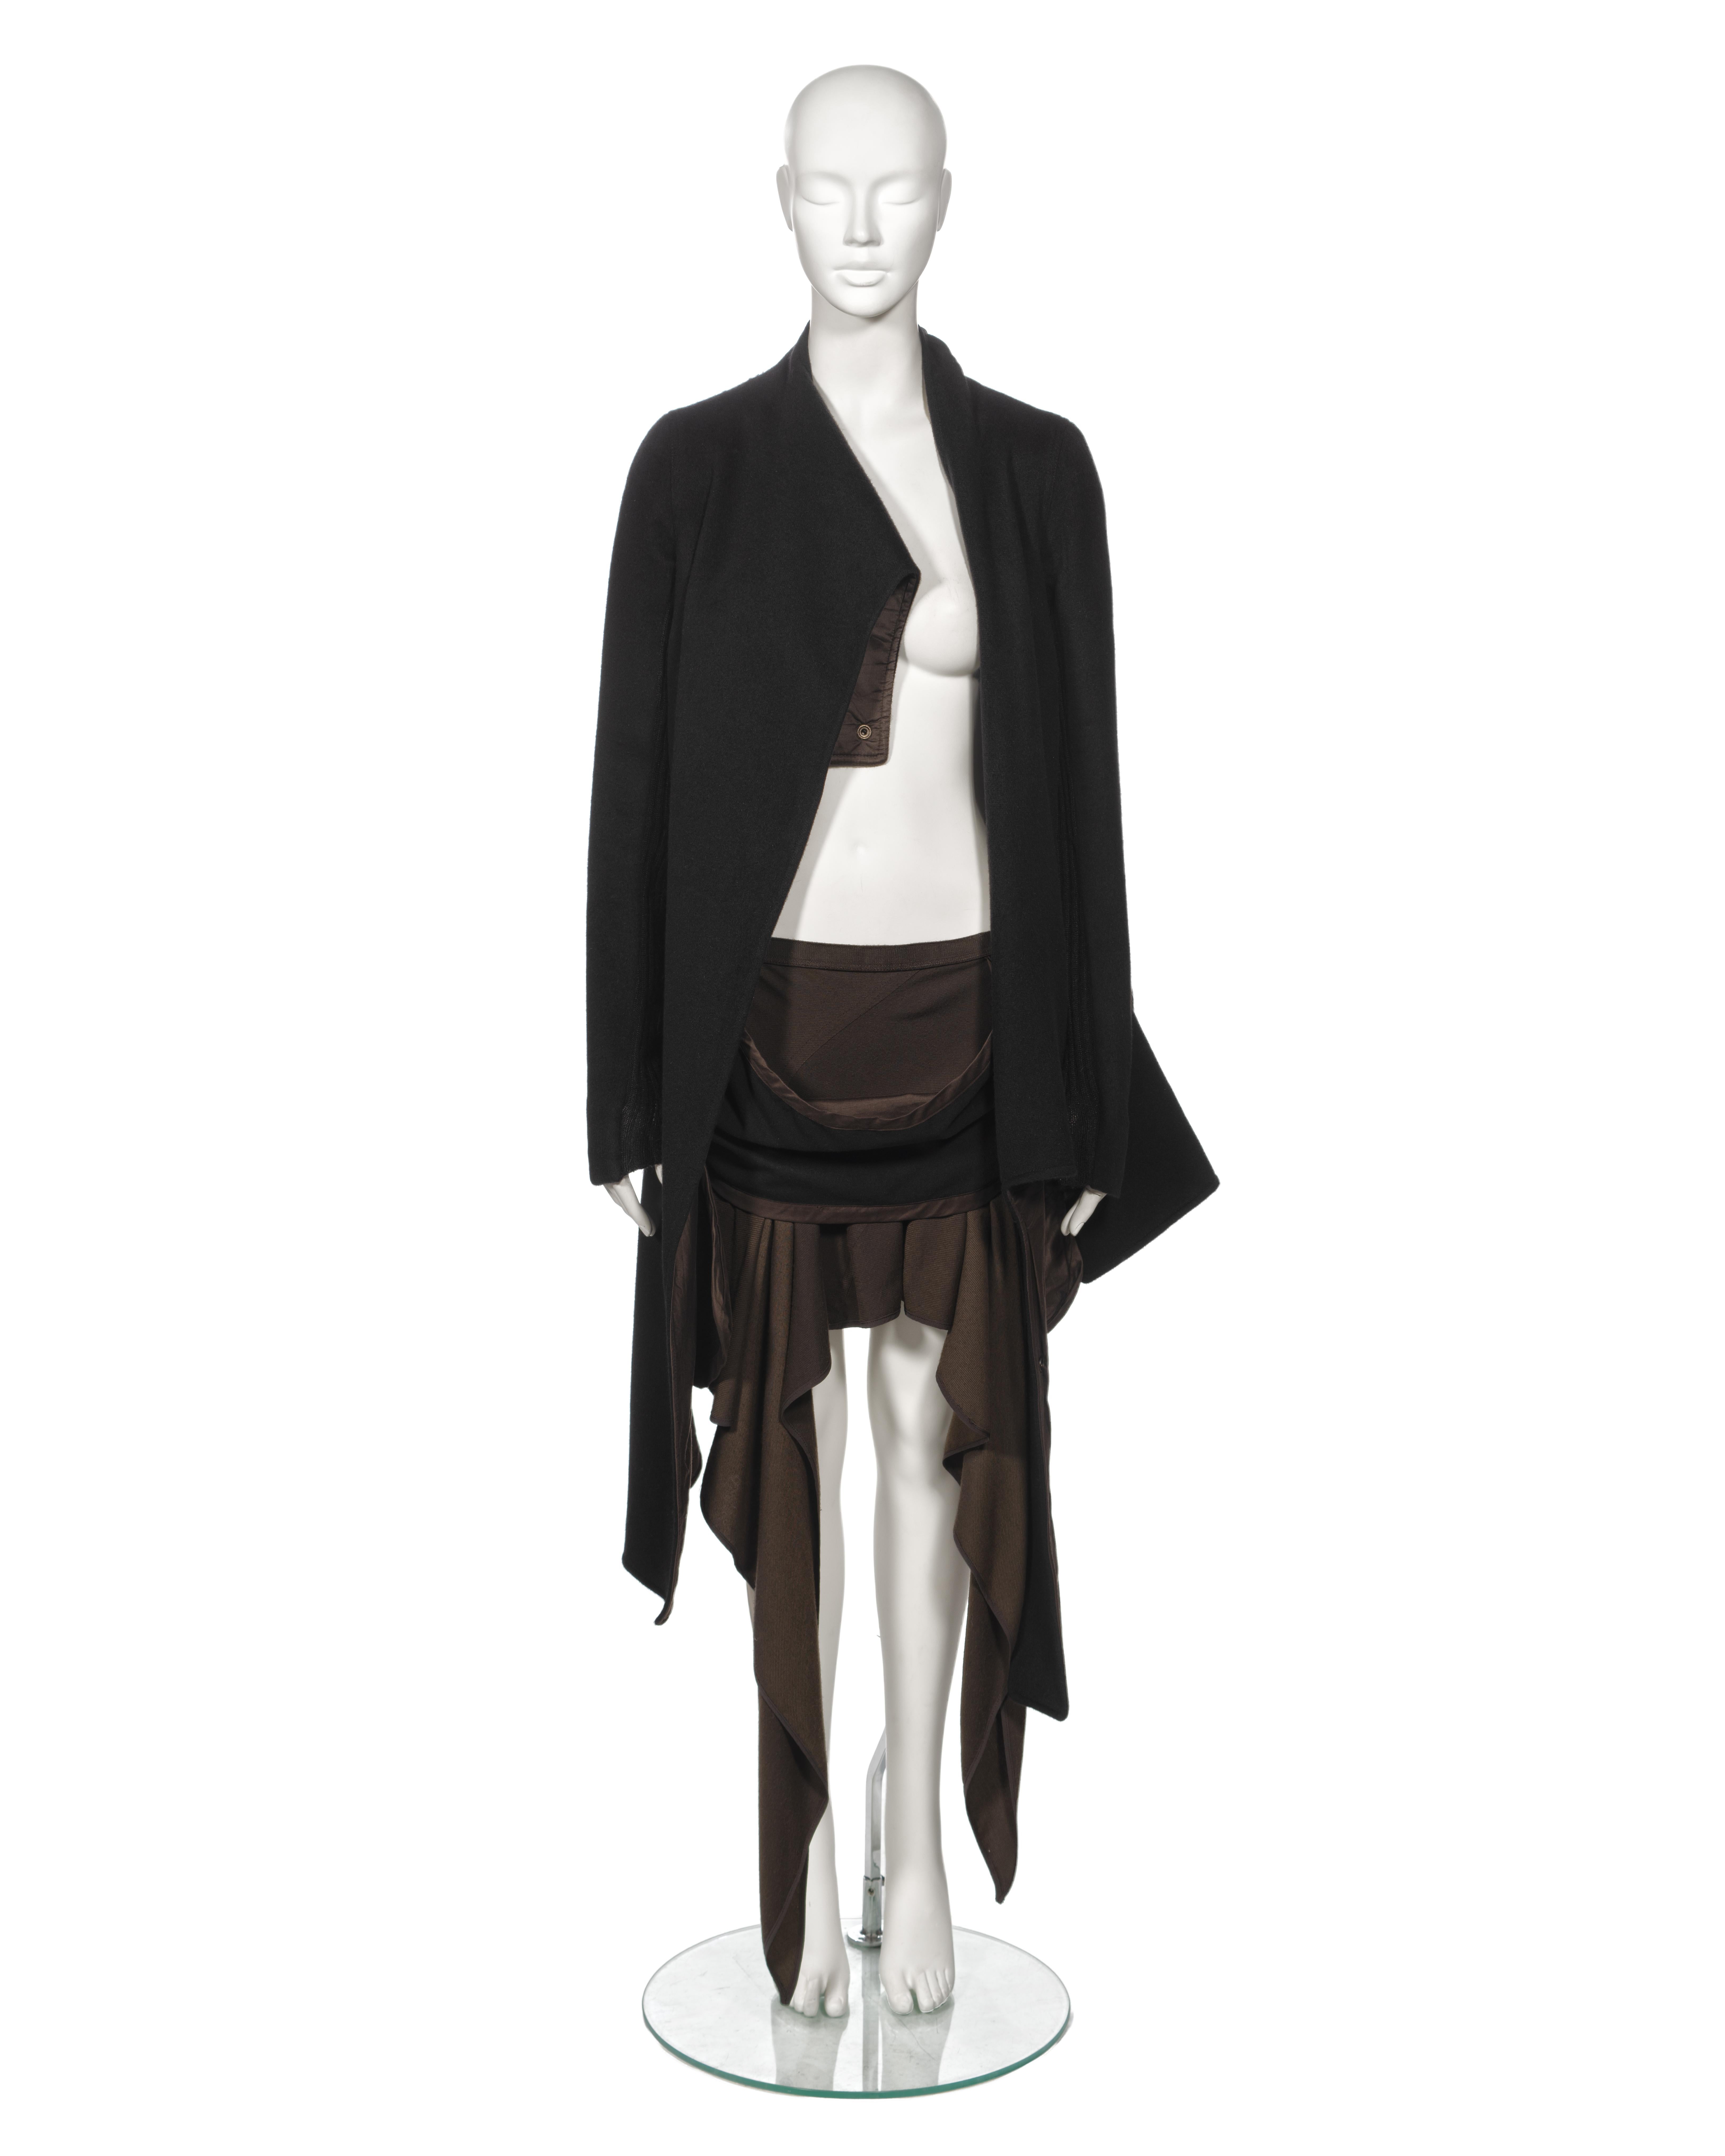 ▪ Archival Rick Owens 'Queen' Ensemble
▪ Fall-Winter 2004
▪ Sold by One of a Kind Archive
▪ Asymmetric cut jacket fashioned from black Angora fabric
▪ Showcases a scarf-like attachment draped across the body, forming a generous cowl and secured at